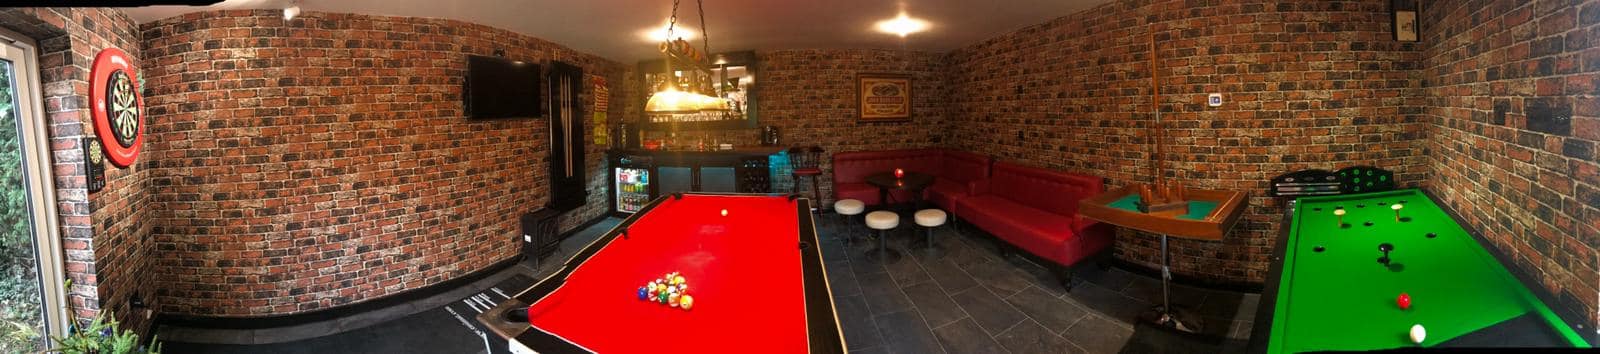 Games Room Pano